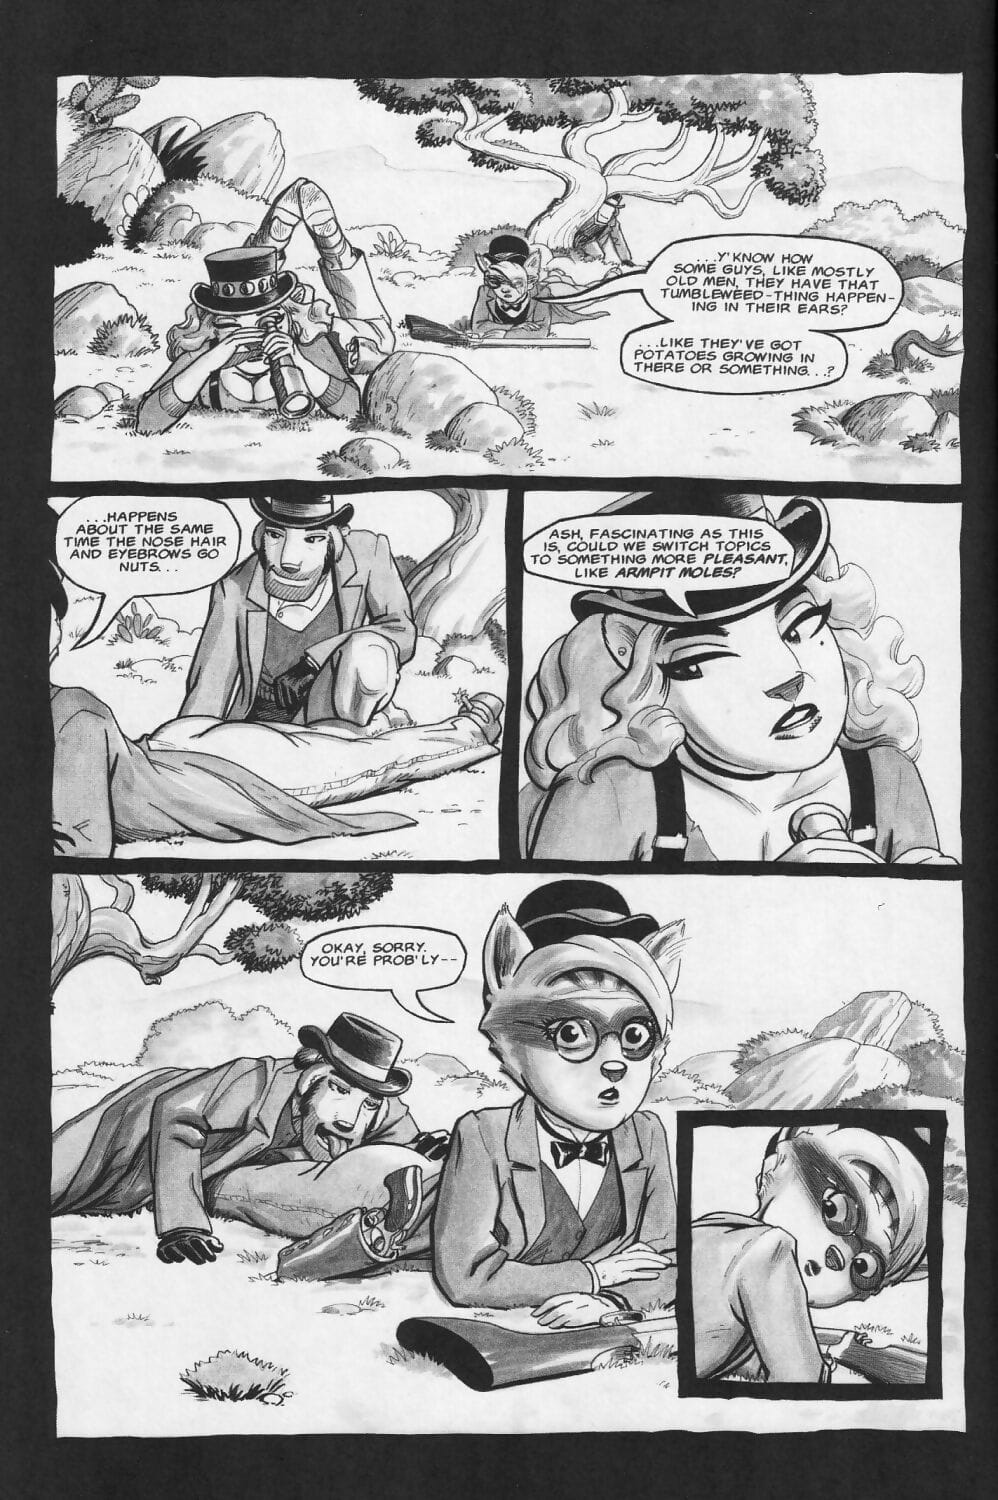 Short Strokes #2 page 1